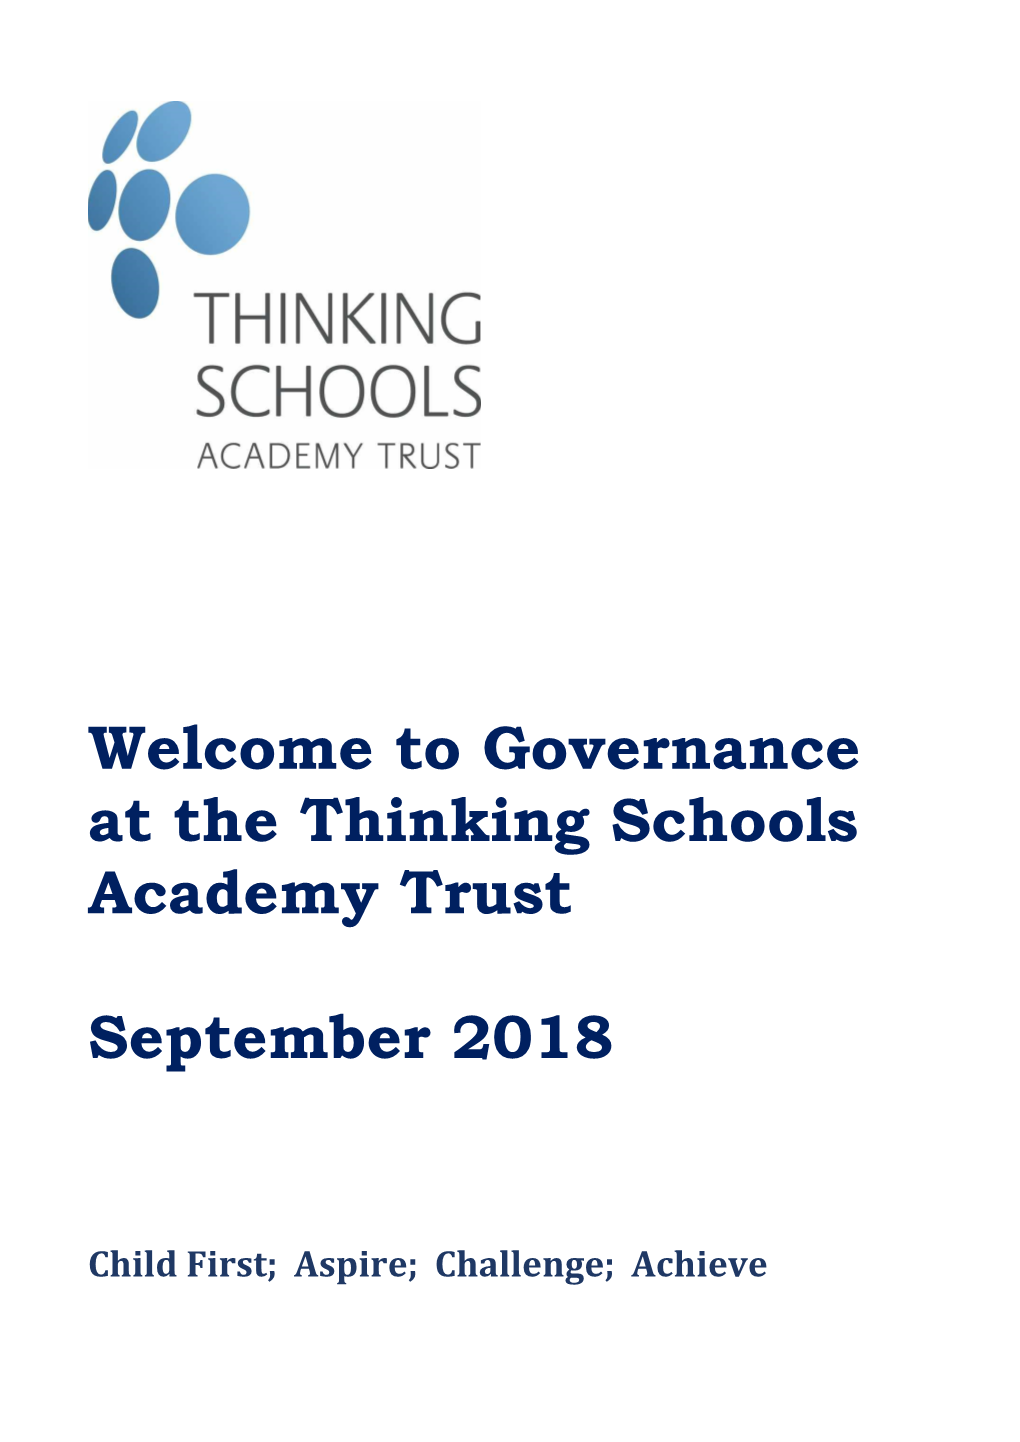 Welcome to Governance at the Thinking Schools Academy Trust